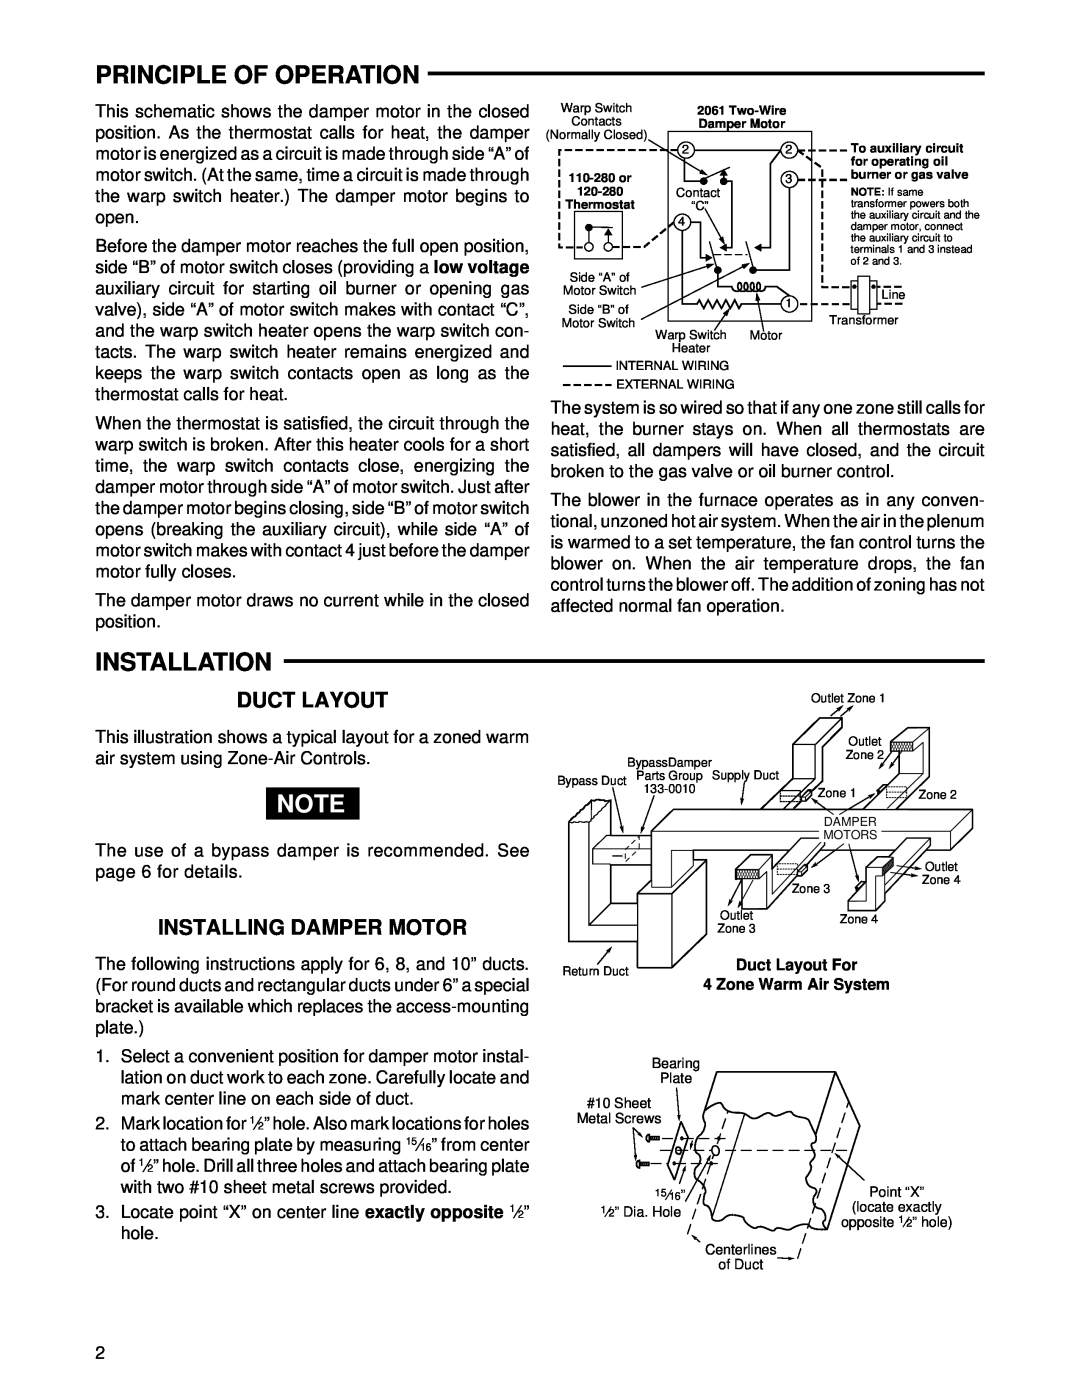 White Rodgers 2061 installation instructions Principle Of Operation, Installation, Duct Layout, Installing Damper Motor 